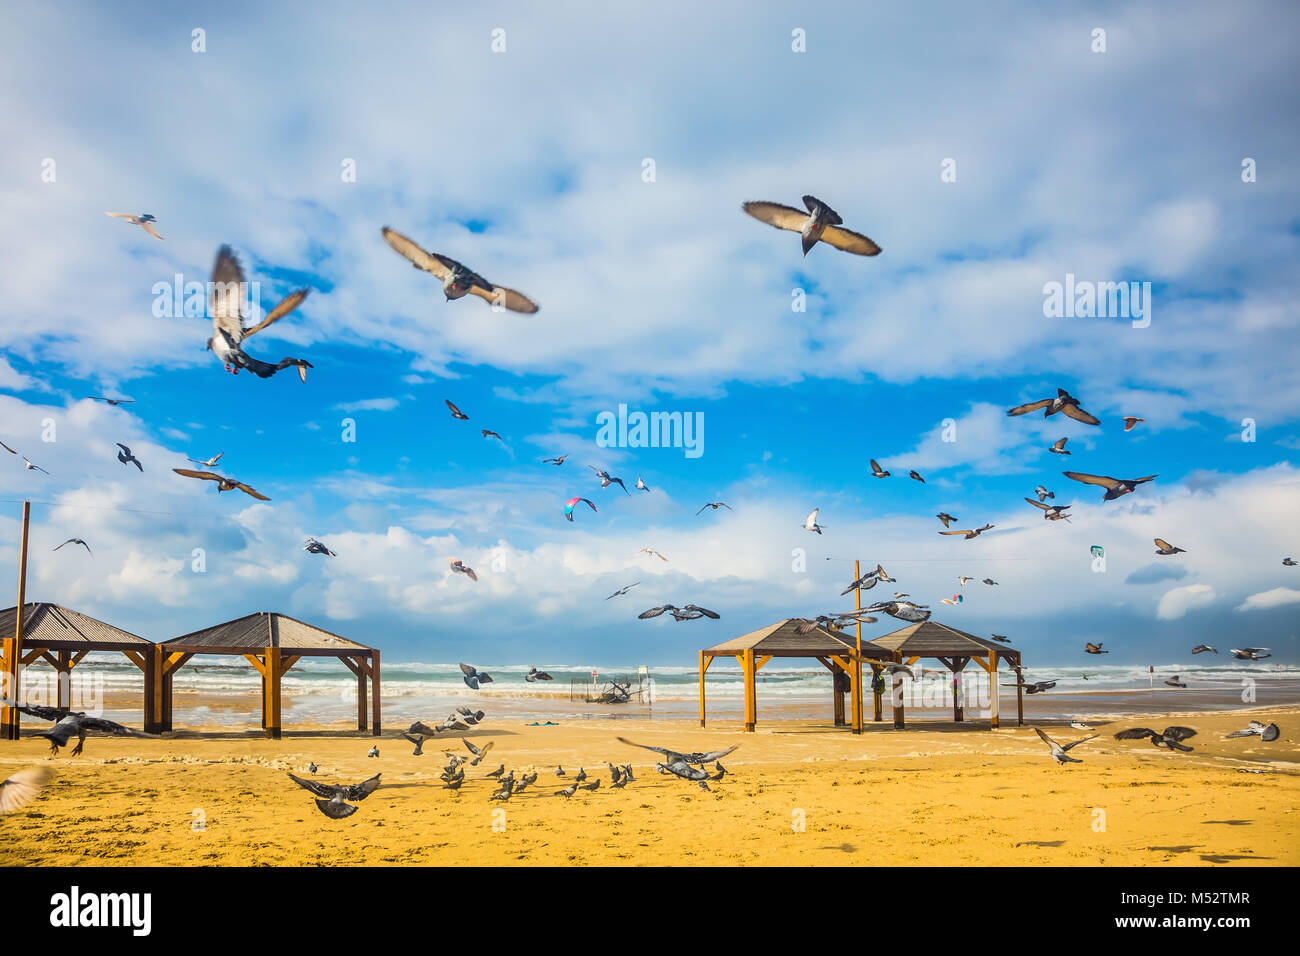 Flock of pigeons flying away from sandy beach Stock Photo